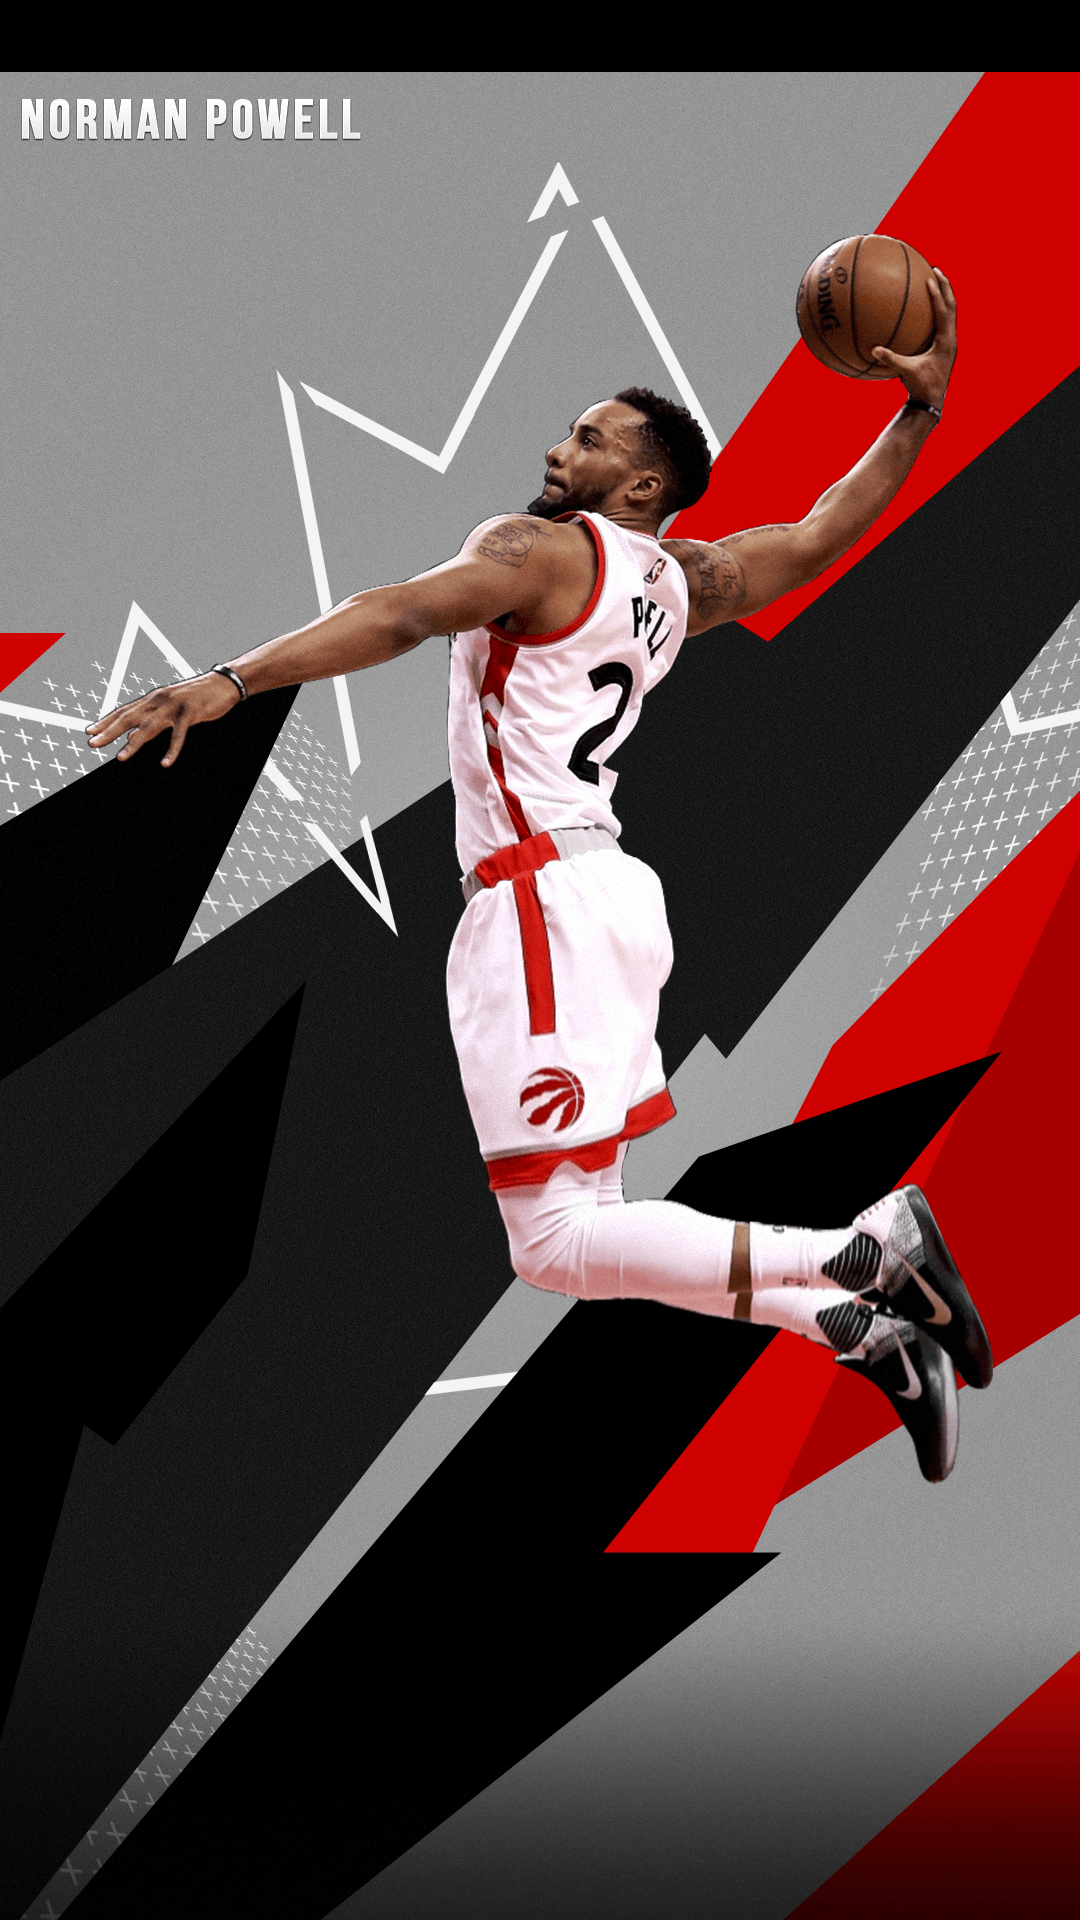 Norman Powell 2k18 style mobile wallpaper I made alt in comments